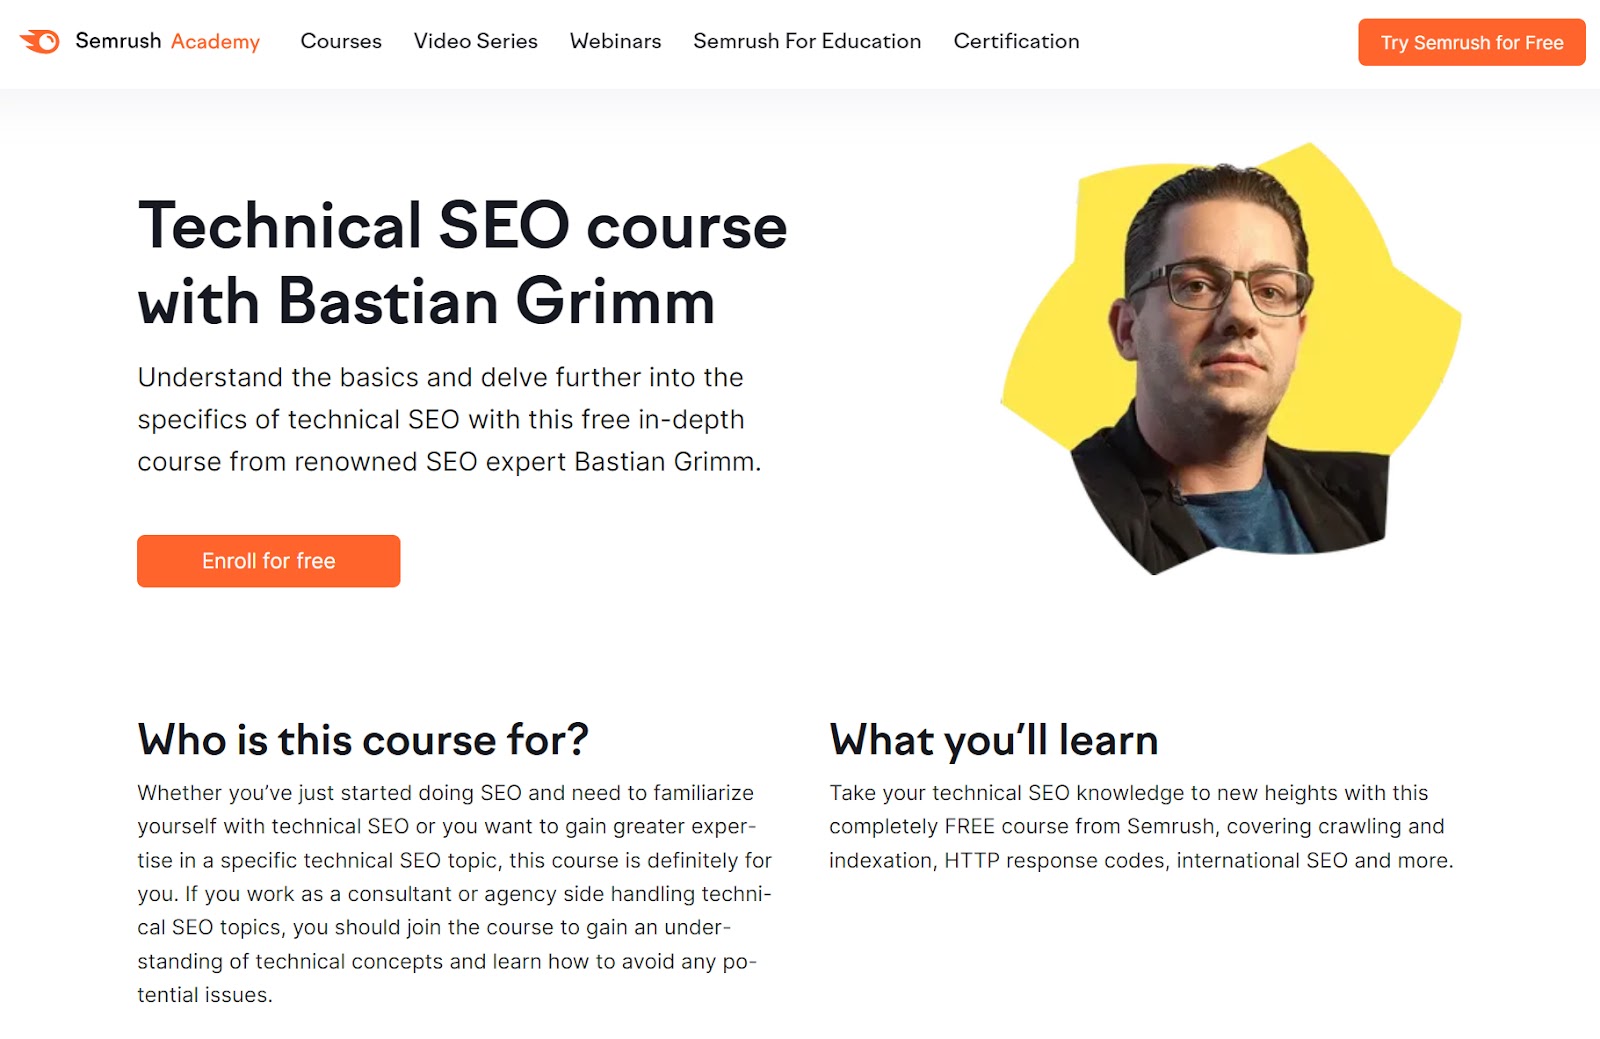 Technical SEO Course with Bastian Grimm landing page